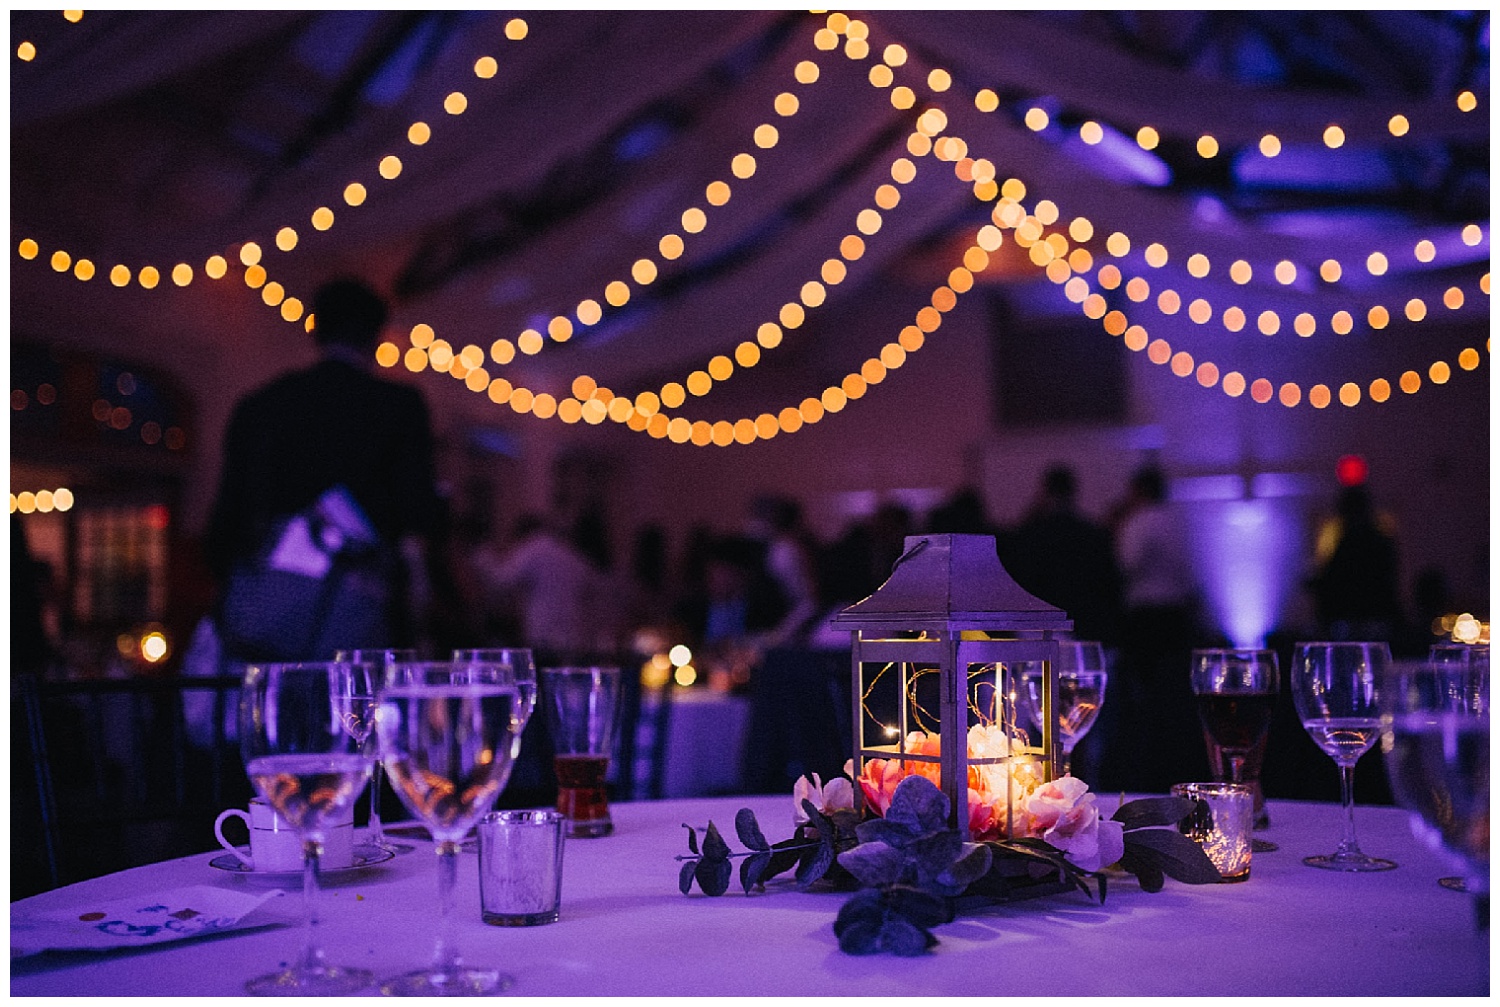 candle centerpieces at night in wedding reception